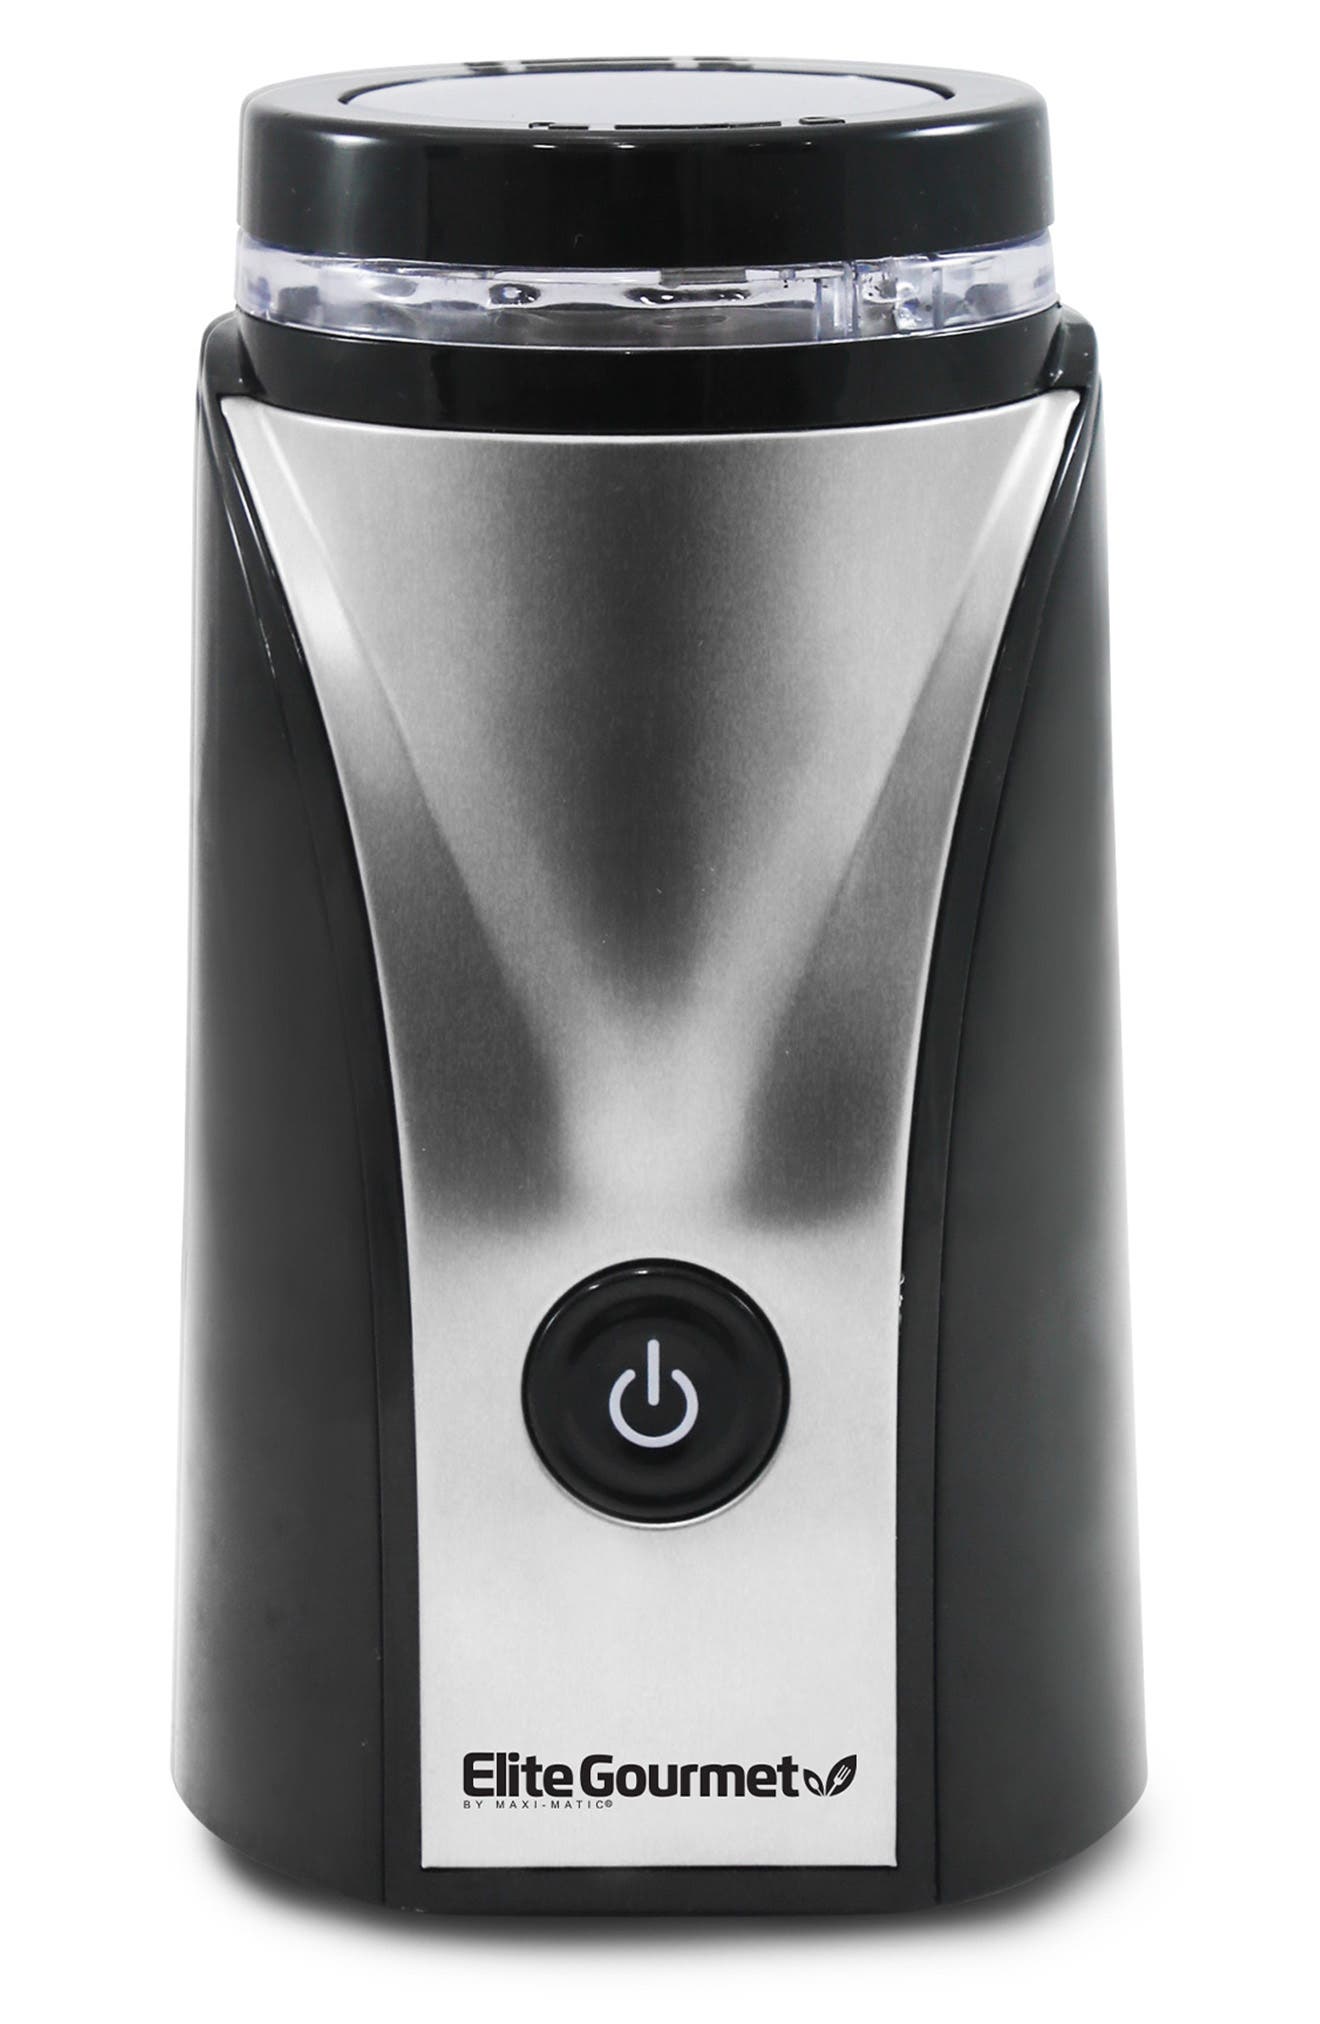 Maxi-matic Elite Cuisine Ets-9053 Coffee And Spice Grinder With Stainless In Black